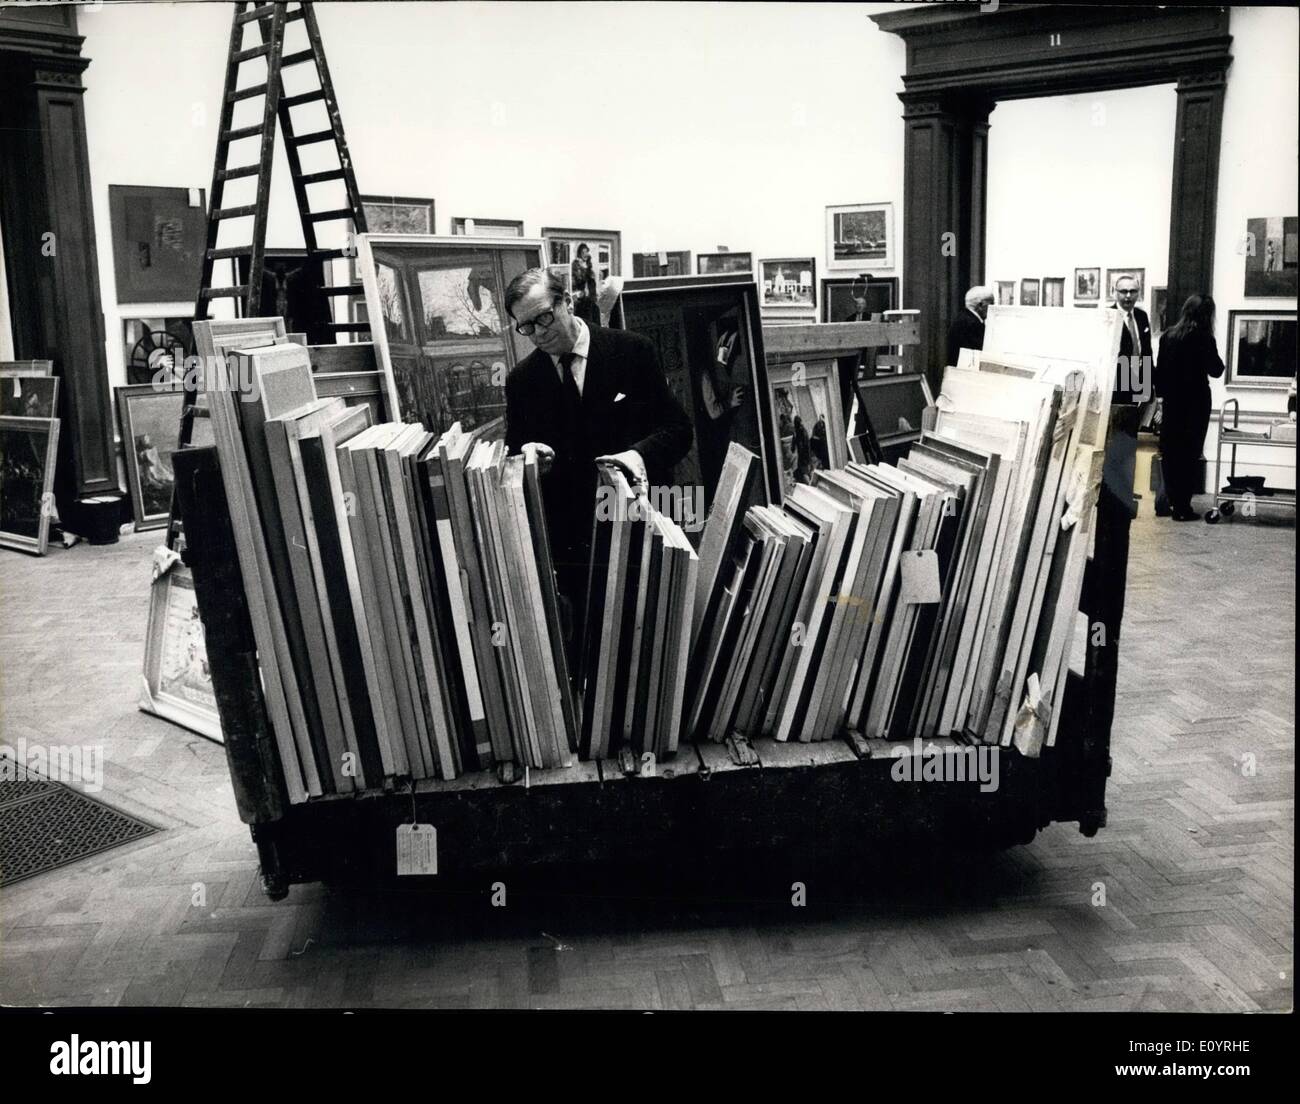 Apr. 04, 1971 - Preparing for the Royal Academy summer exhibition: Every year the Royal Academy faces the immense task of getting their Summer Exhibition ready by early May. Its Selection Committee, traditionally 15 Royal Academicians, has to consider some 12,000 paintings, drawings and pieces of sculpture. The next stage is left to the Hanging Committee which make the final choice. Photo shows Sir Thomas Monnington, President of the Royal Academy, looks at some of the paintings during today's preparation for the hanging. Stock Photo